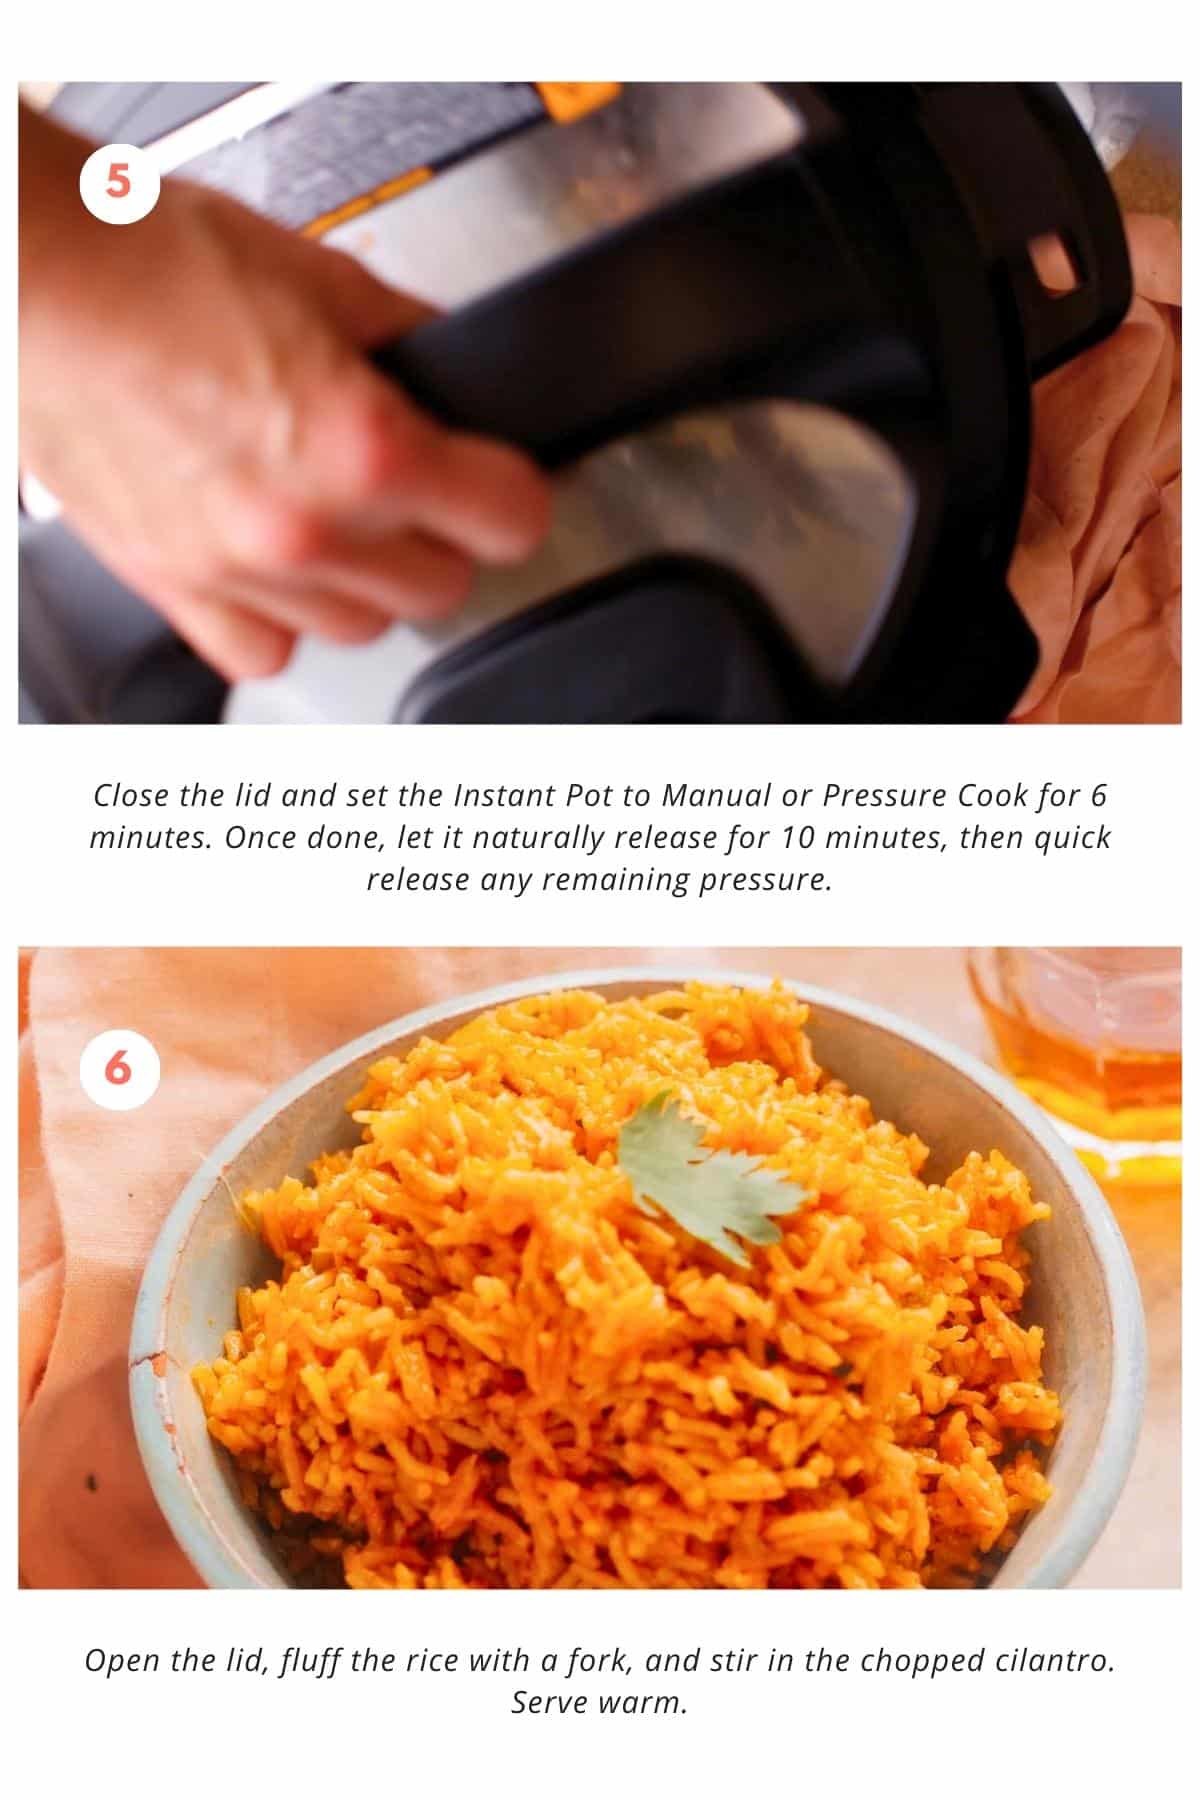 The lid is closed and the Instant Pot is set to Manual or Pressure Cook for 6 minutes. After cooking, the pressure is naturally released for 10 minutes before quick releasing any remaining pressure. The lid is opened, and the rice is fluffed with a fork. Finally, the chopped cilantro is stirred in, and the Mexican rice is ready to be served warm.